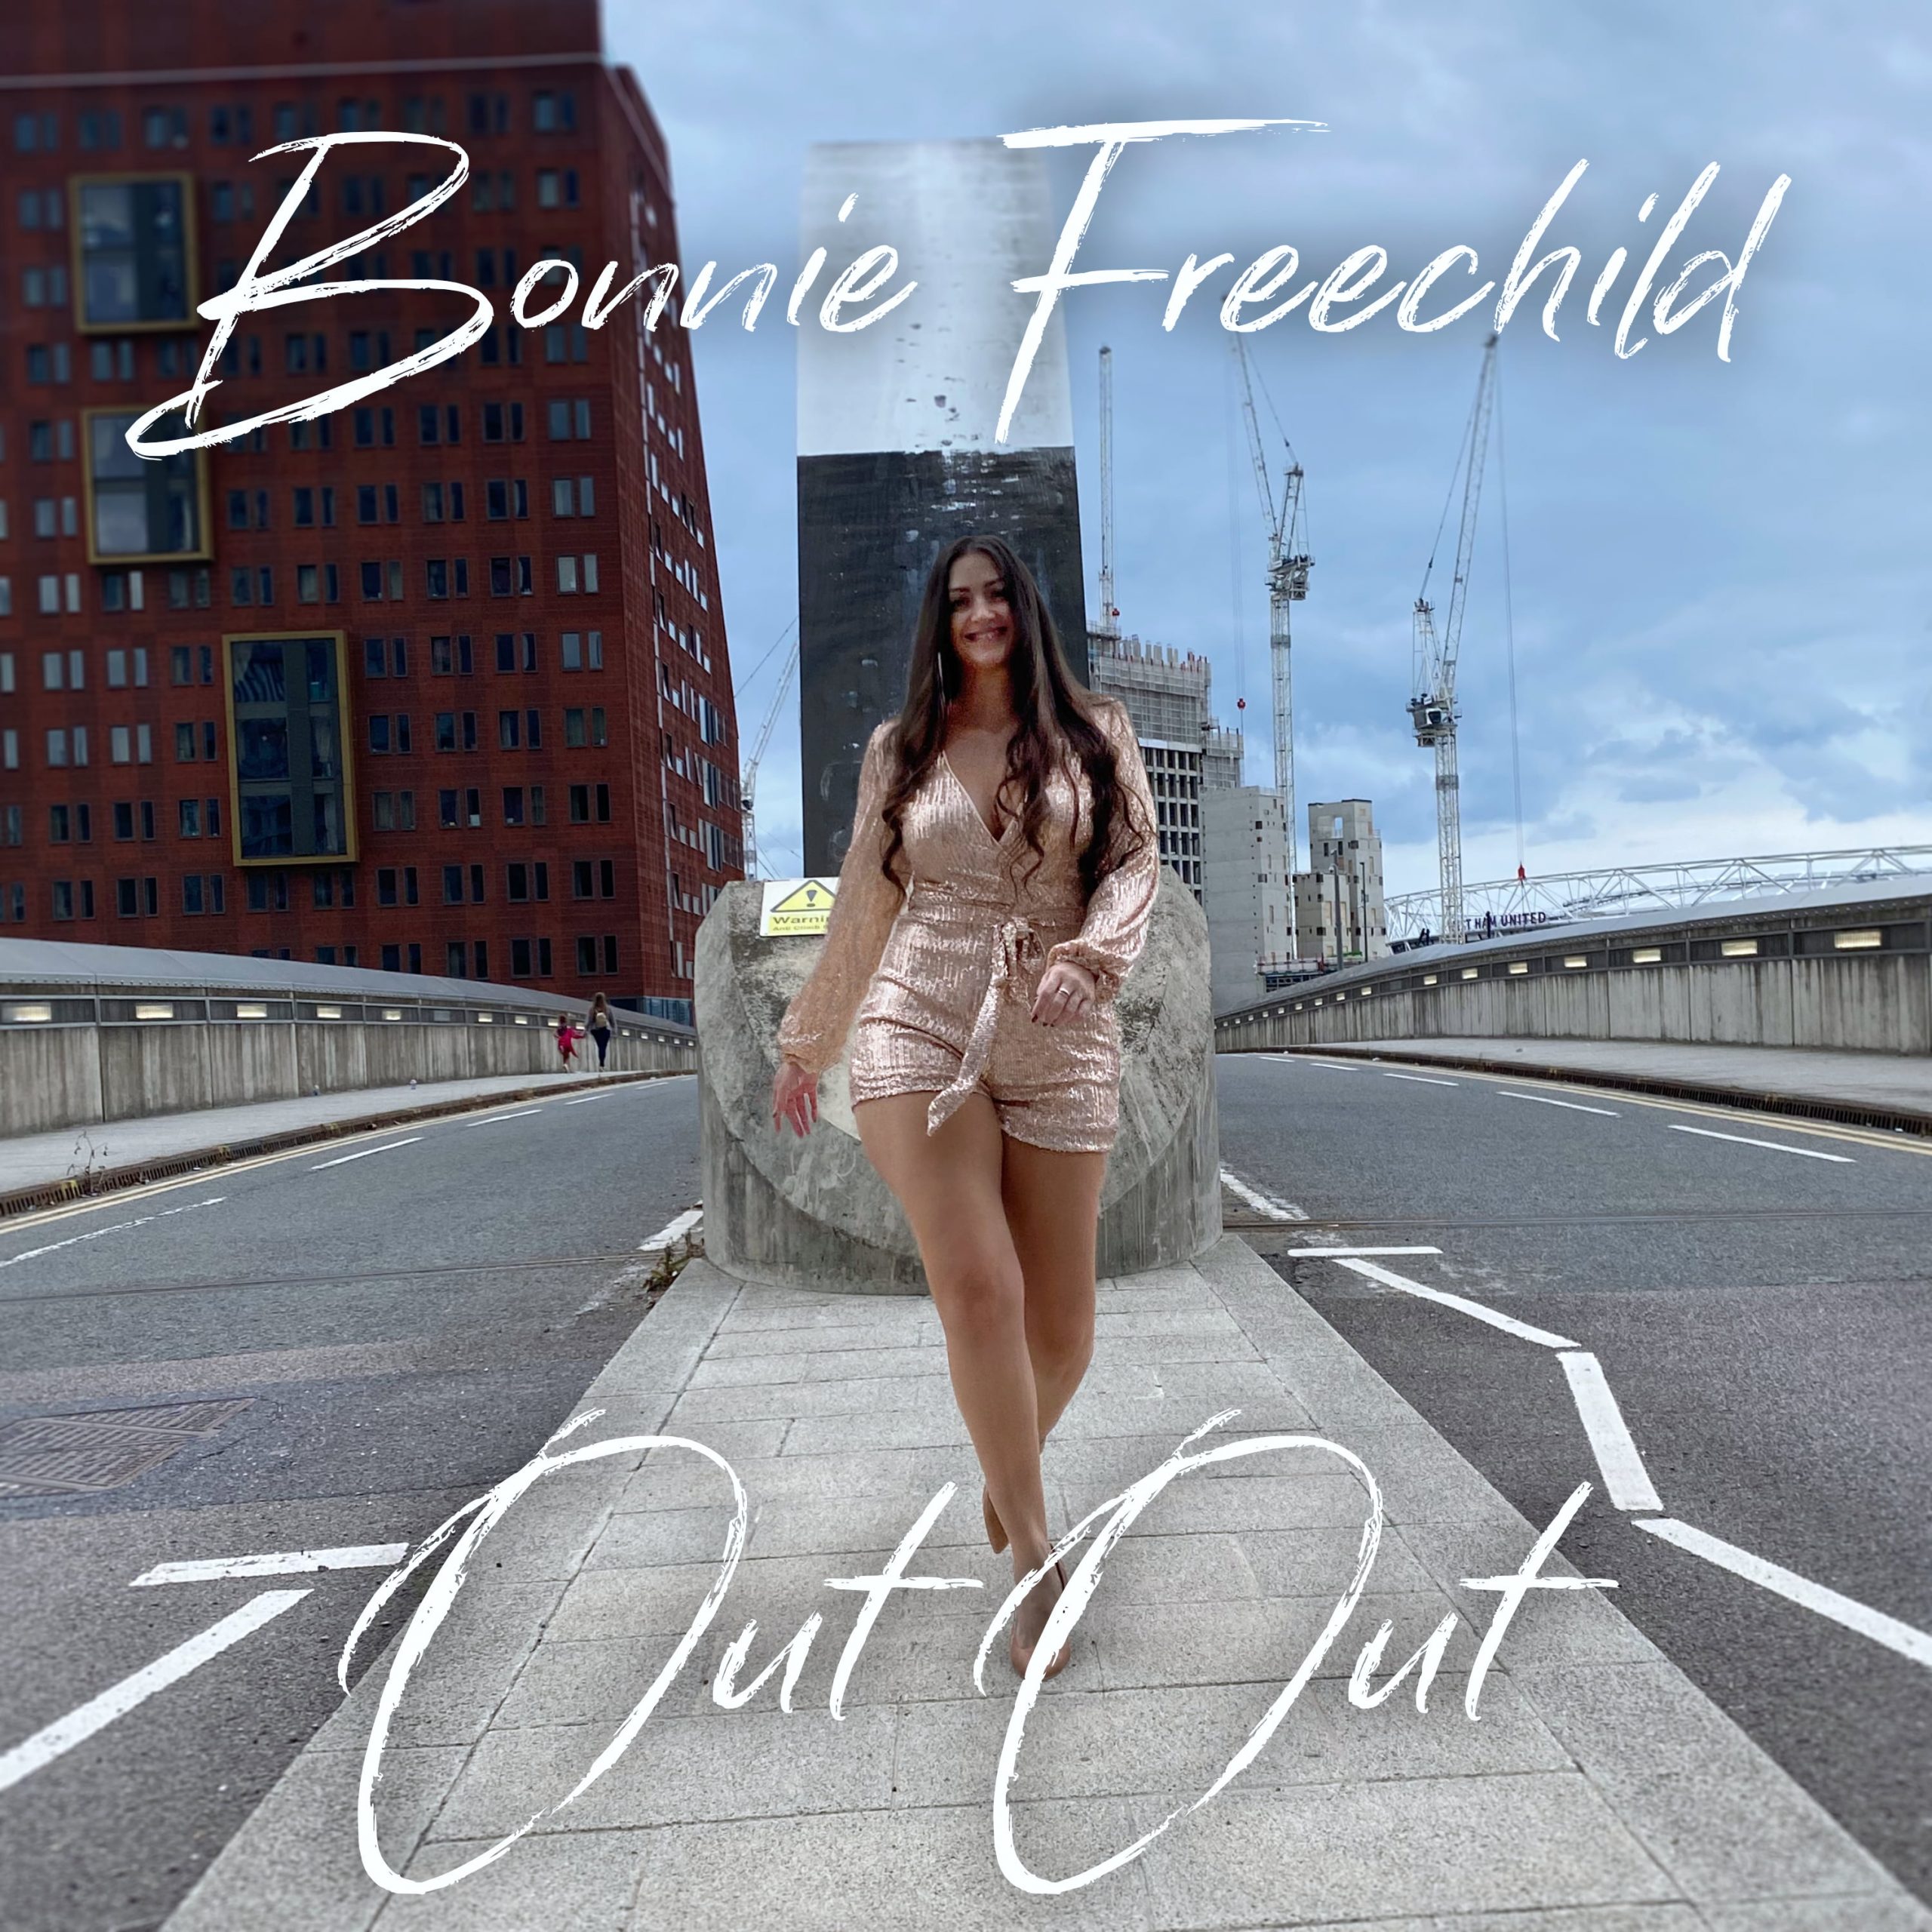 Mixing Afrobeat drum samples phrased in a typically Caribbean way, ‘Bonnie Freechild’ releases ‘Out Out’